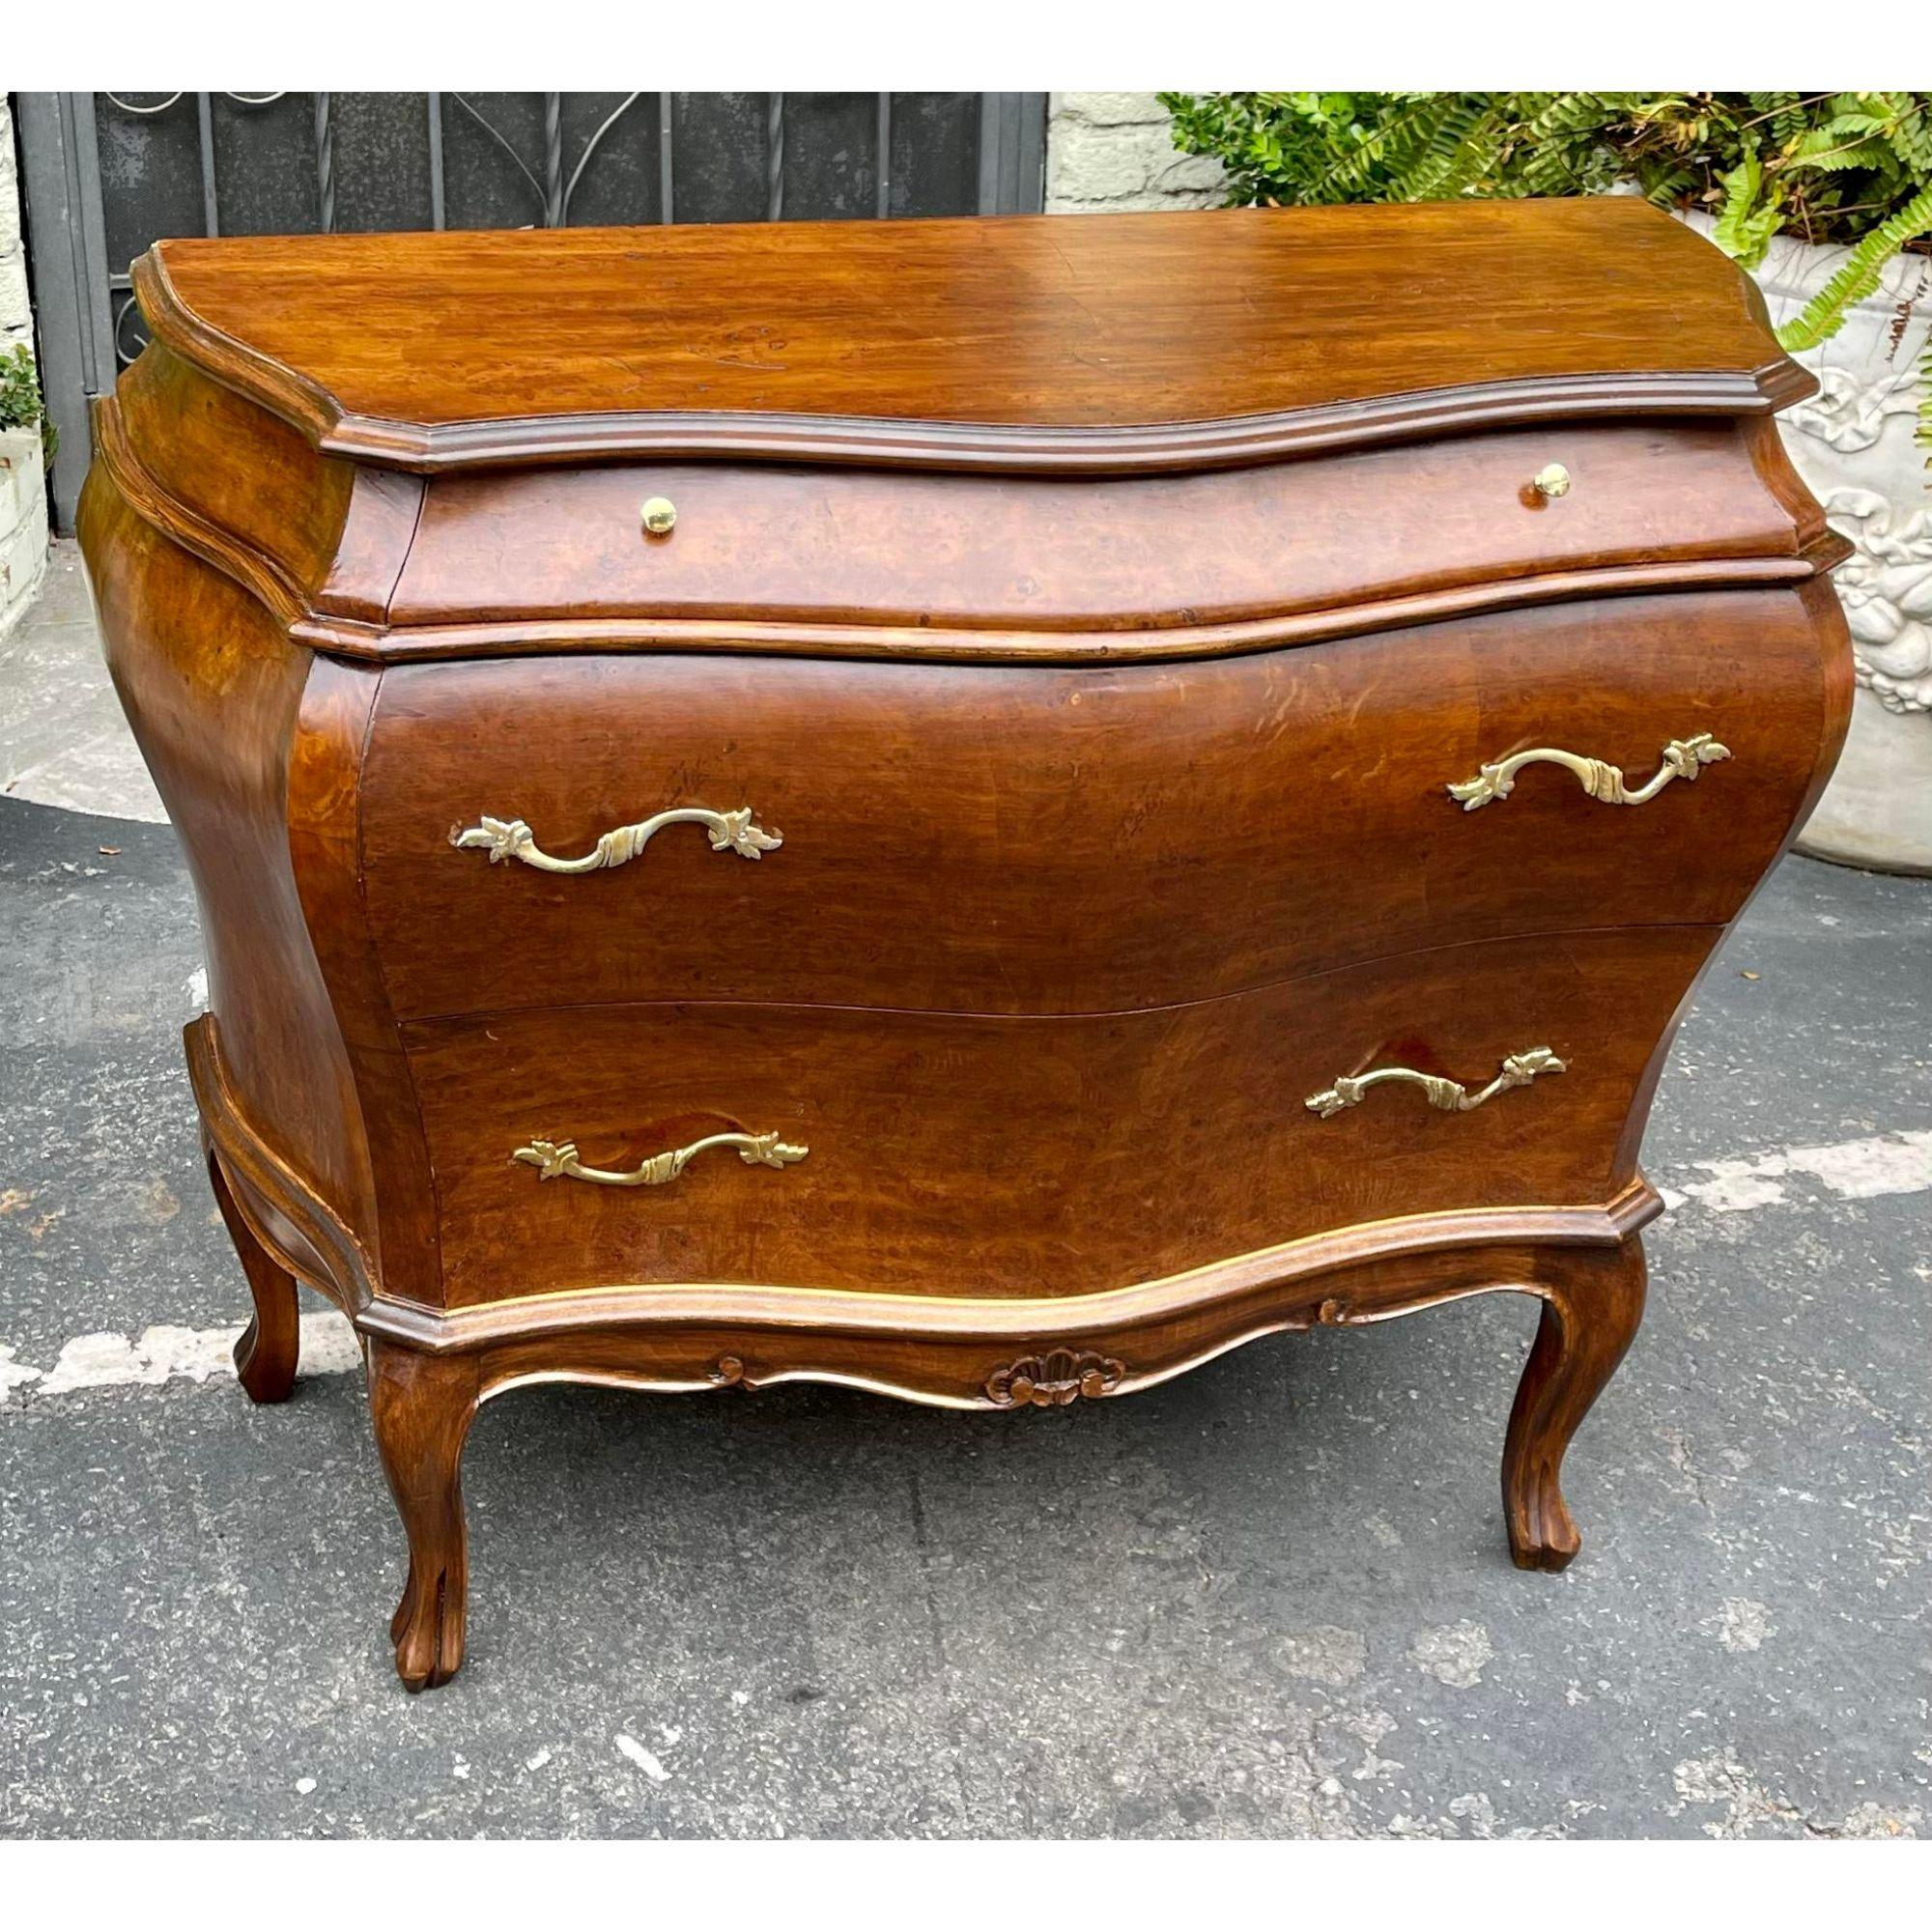 20th Century 19th C, Style Italian Bombay Burl Walnut Commode Night Stand End Table